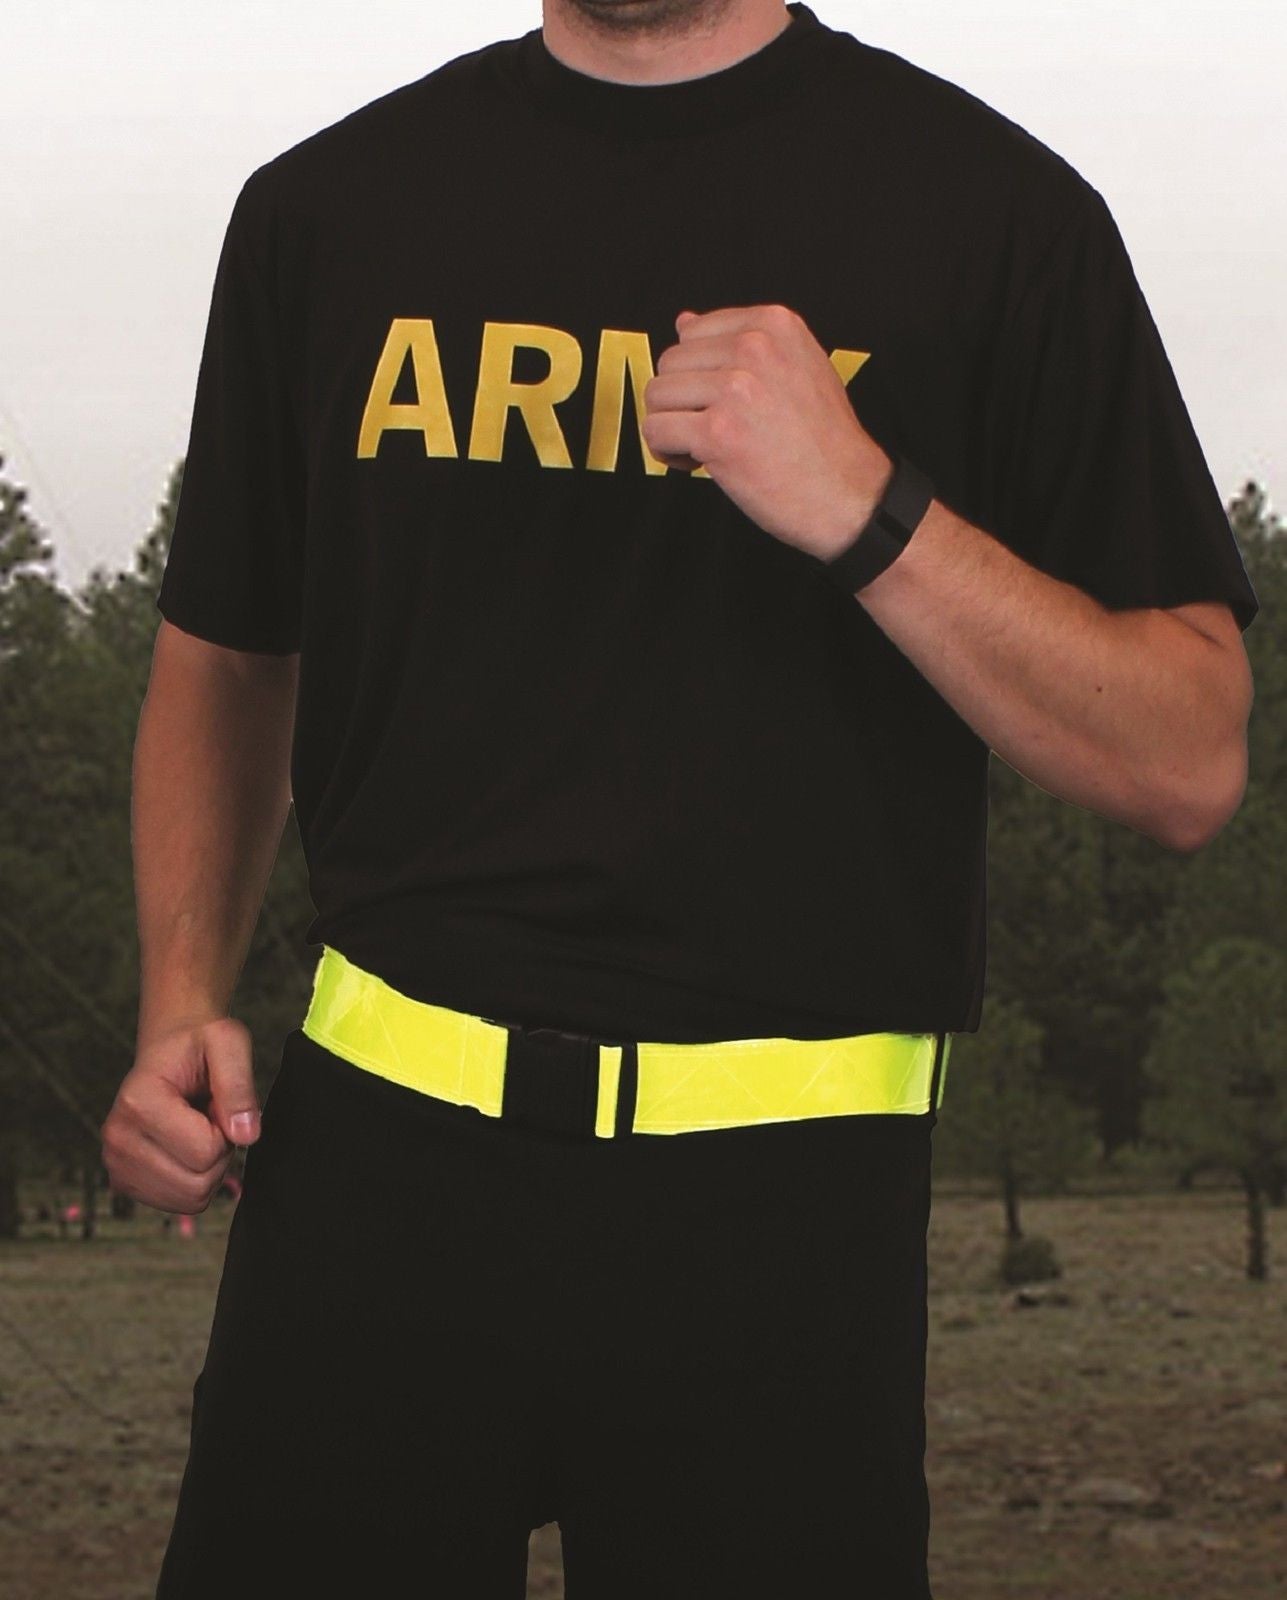 Reflective Neon Yellow Physical Training PT Belt - Rothco Safety Army Run Belts